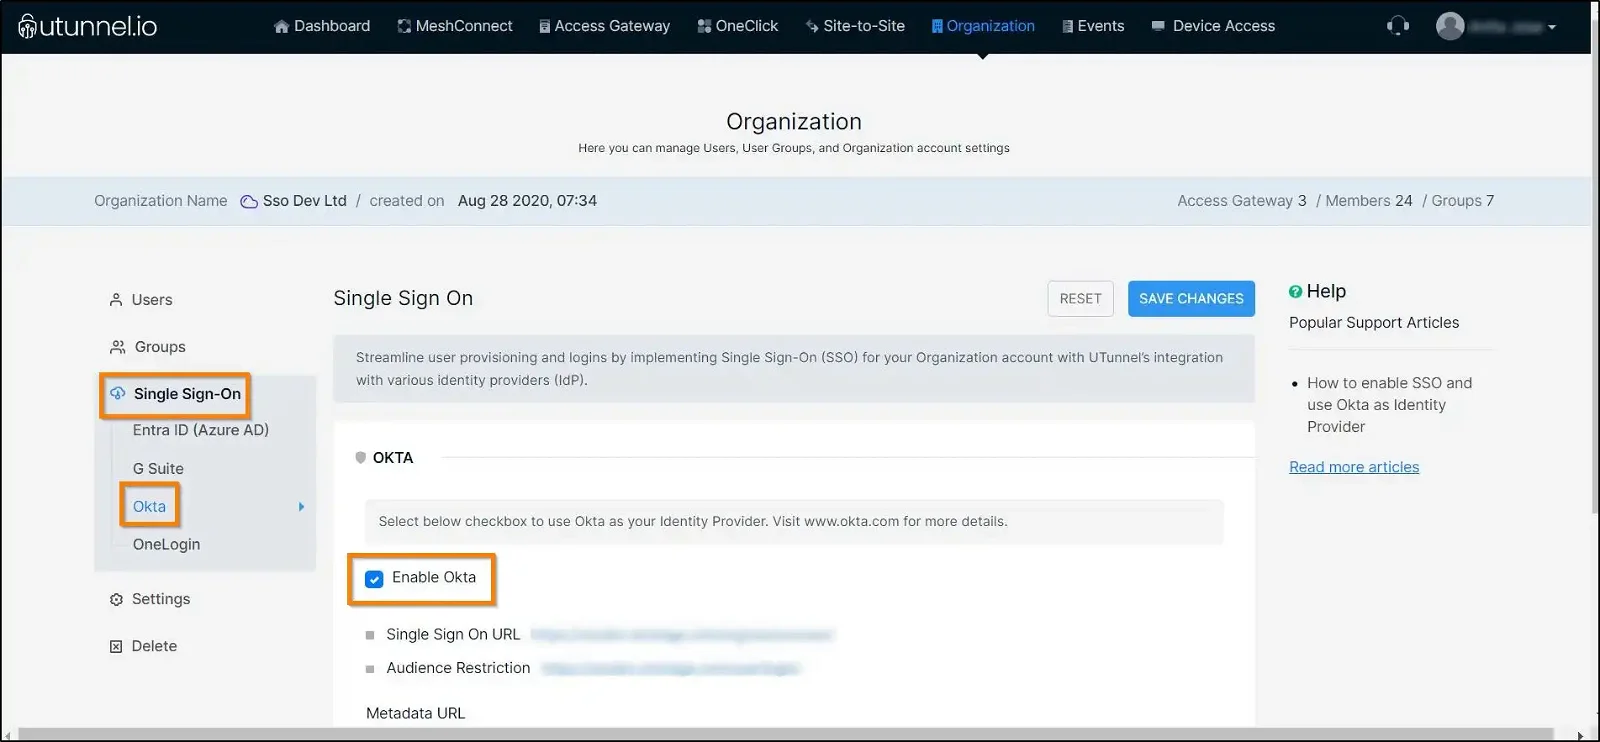 How to enable SSO and use Okta as identity provider enable Okta in the UTunnel